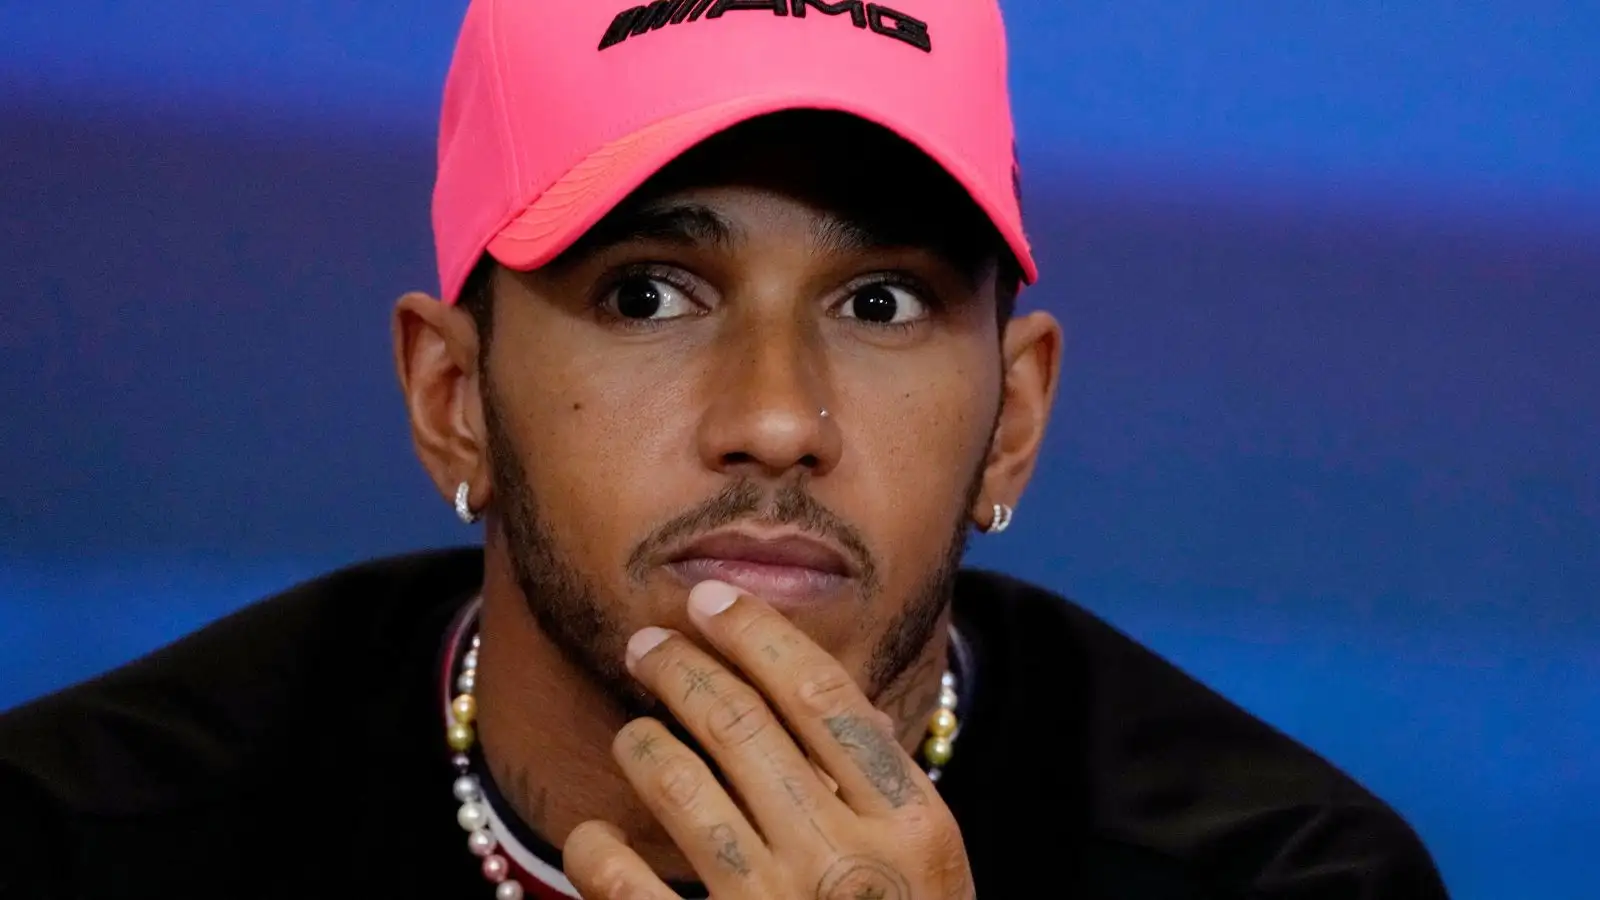 Lewis Hamilton fields questions from the media at the 2023 Abu Dhabi Grand Prix.